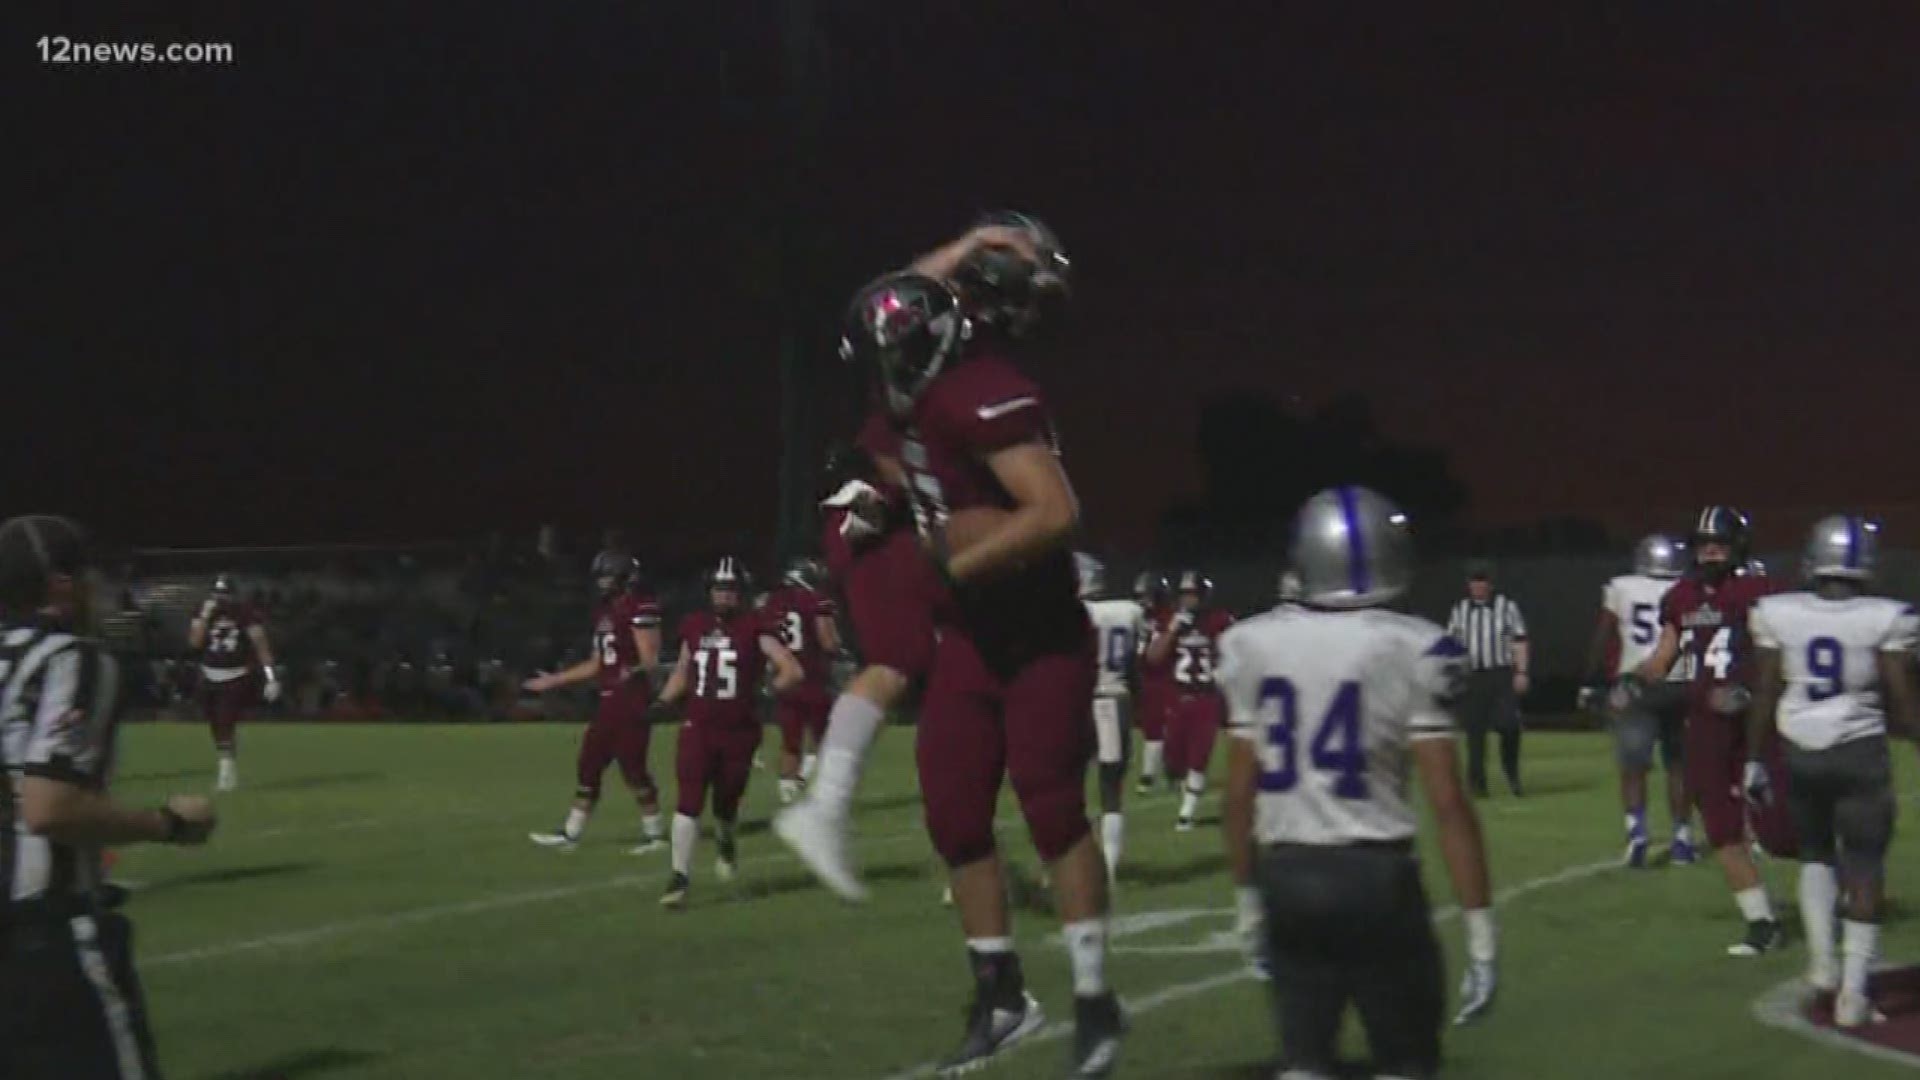 Red Mountain took care of business against Cesar Chavez as the Mountain Lions went on to win 59-27.